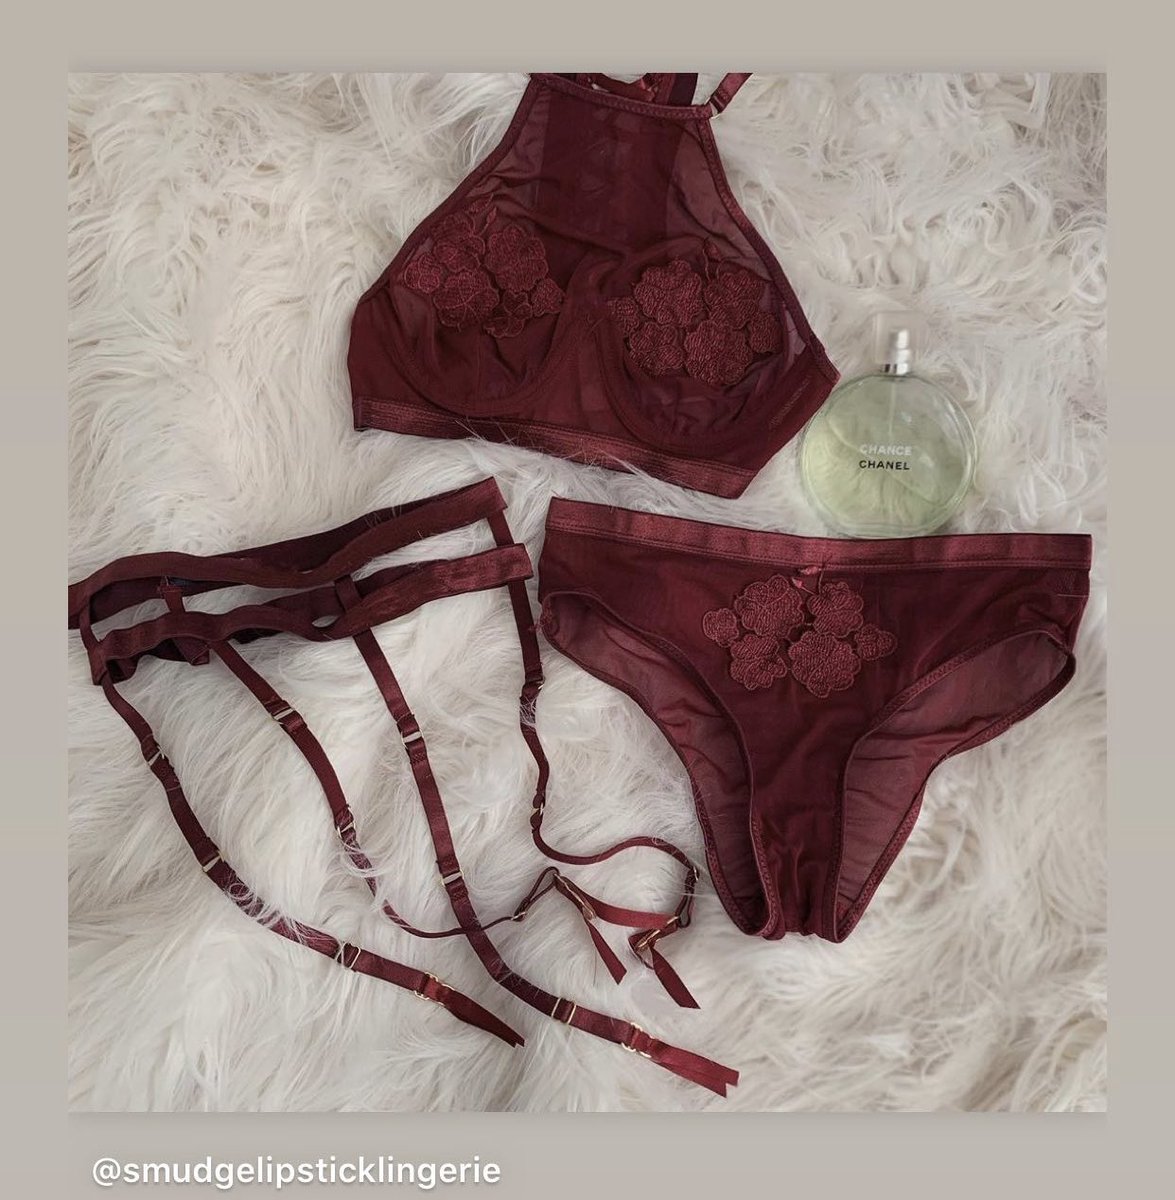 Smudge Lipstick Lingerie on X: All you need to wear at night: lingerie and  Chanel #lingerie #love #lace #sexy t.cohgJYjAgFSU  X